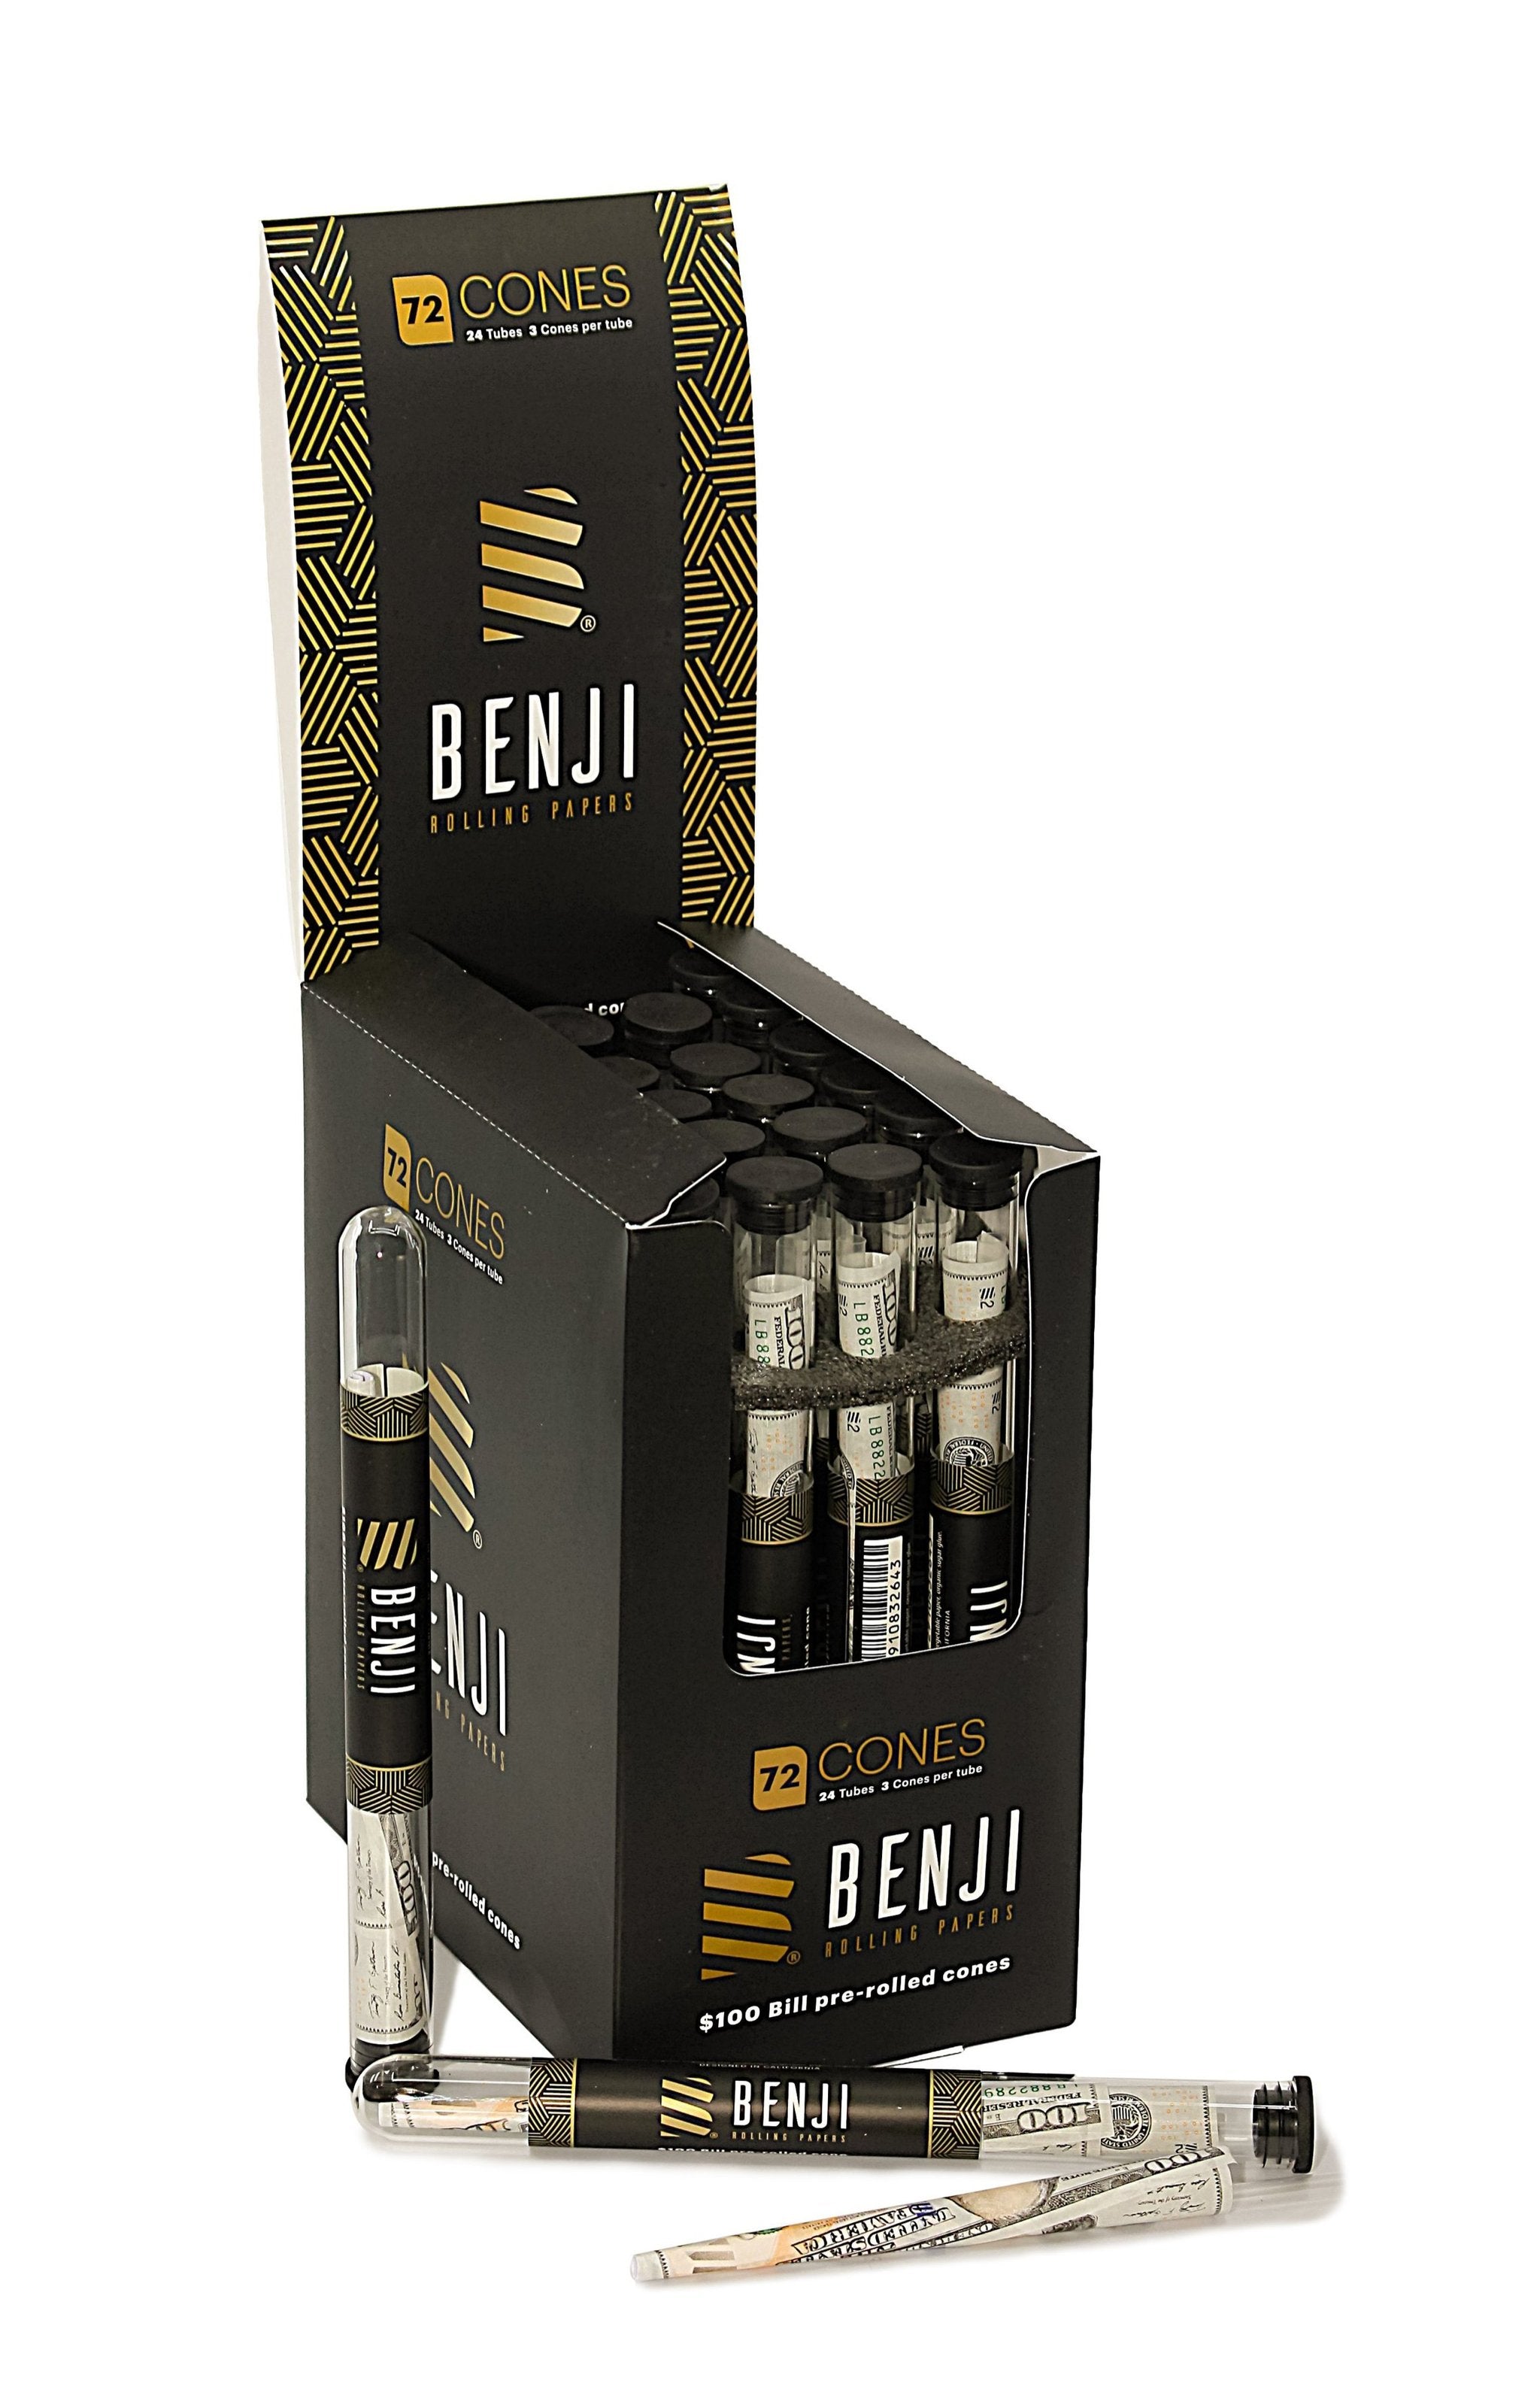 benji papers pre rolled cones box